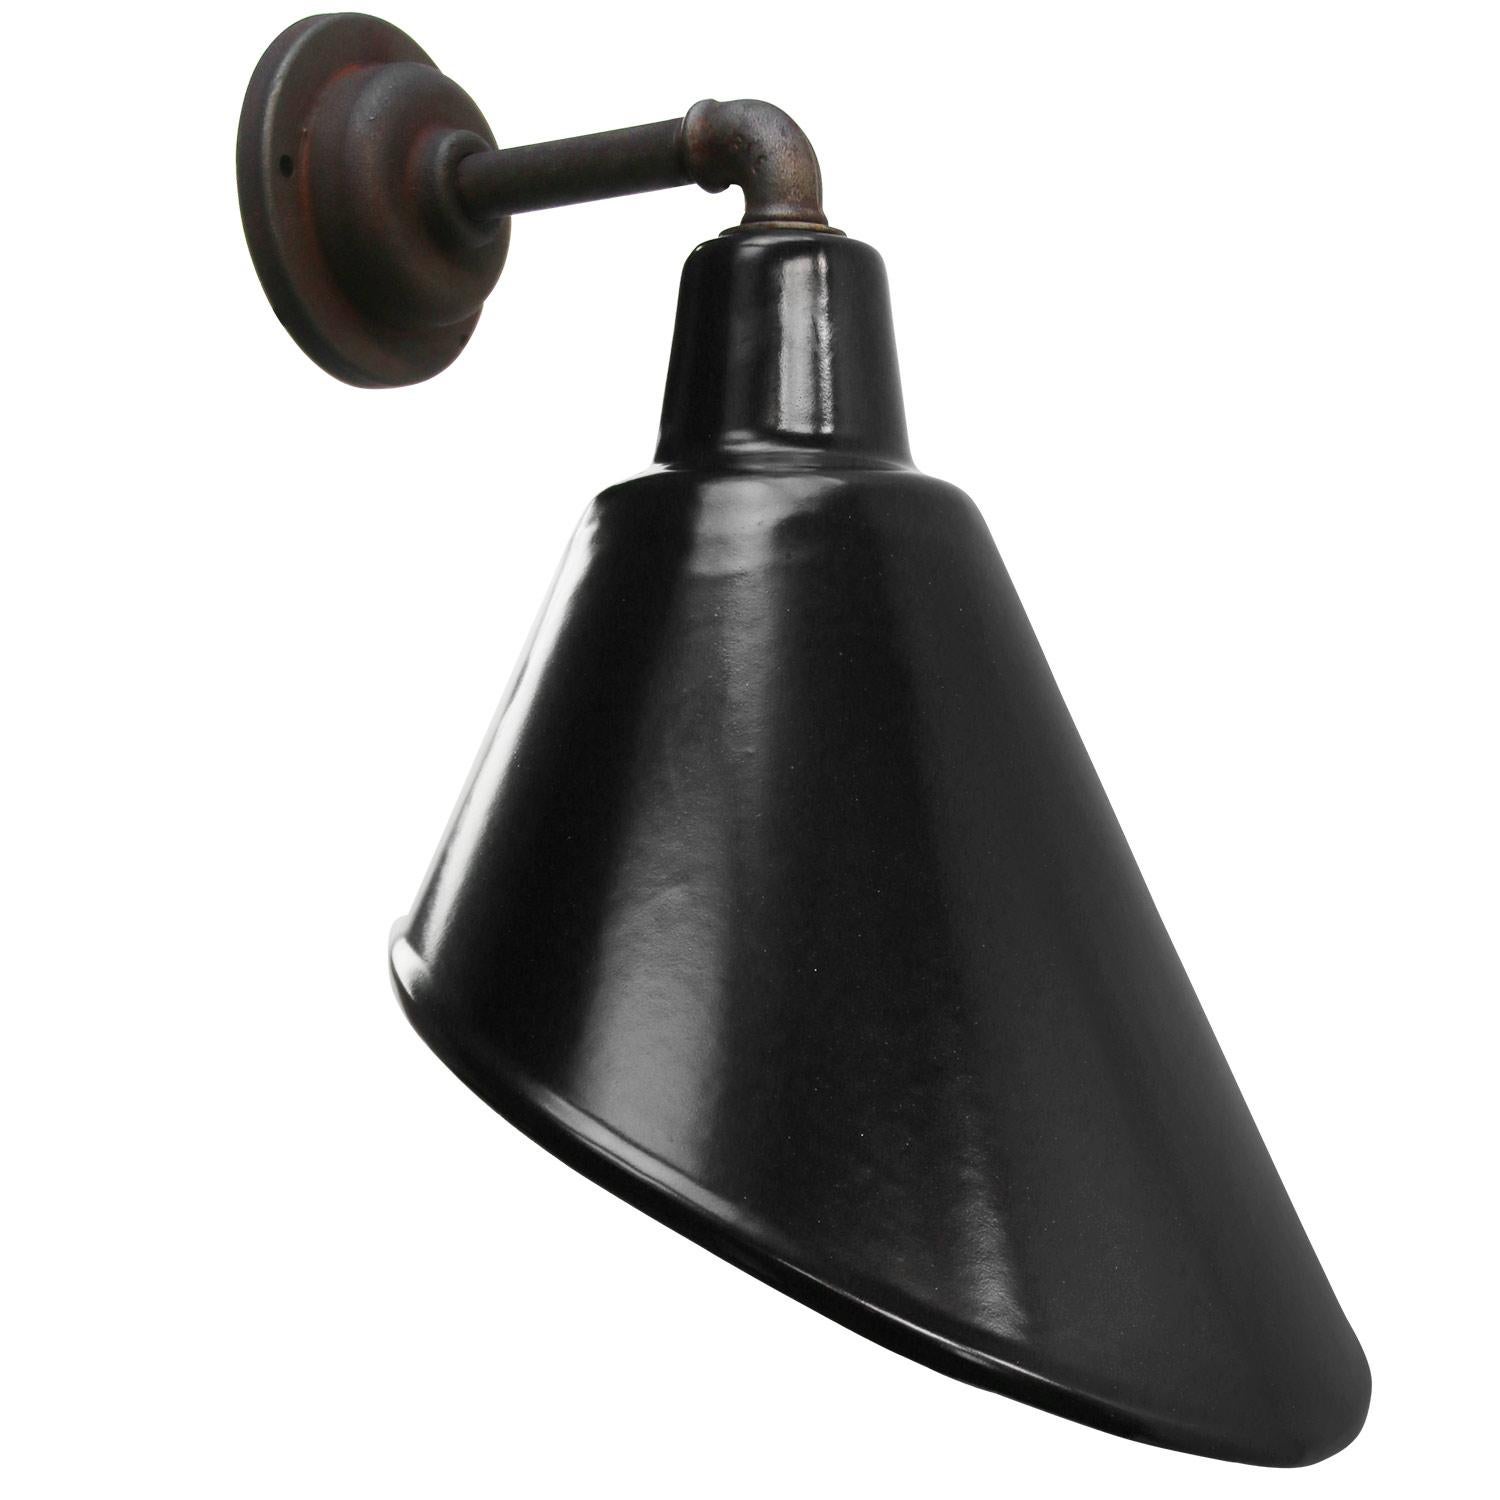 Factory wall light
Black enamel, white interior

Diameter cast iron wall piece:  10.5 cm / 4”.
2 holes to secure

Weight: 2.00 kg / 4.4 lb

Priced per individual item. All lamps have been made suitable by international standards for incandescent